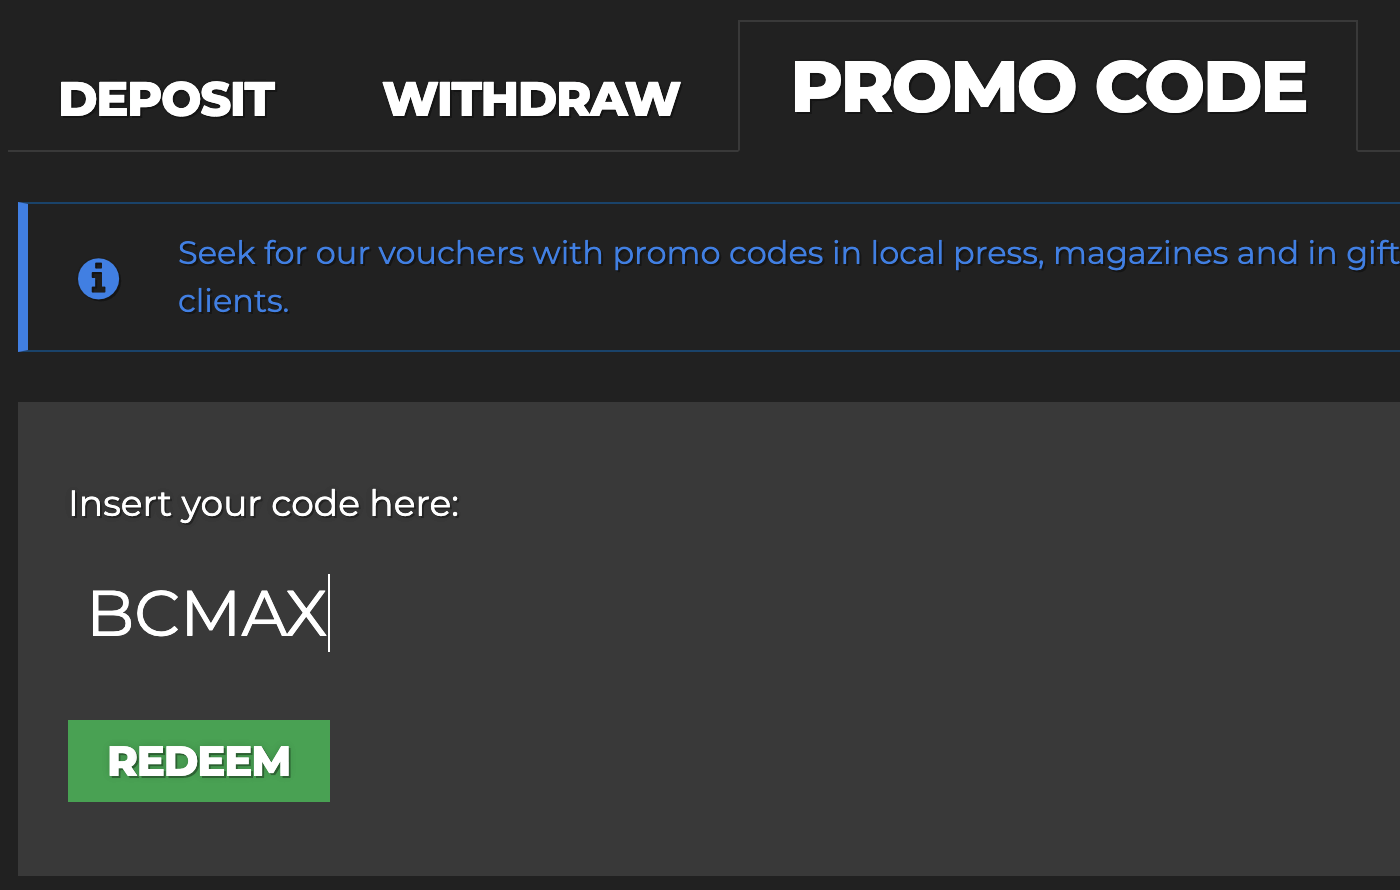 Where to put the EnergyBet promo code